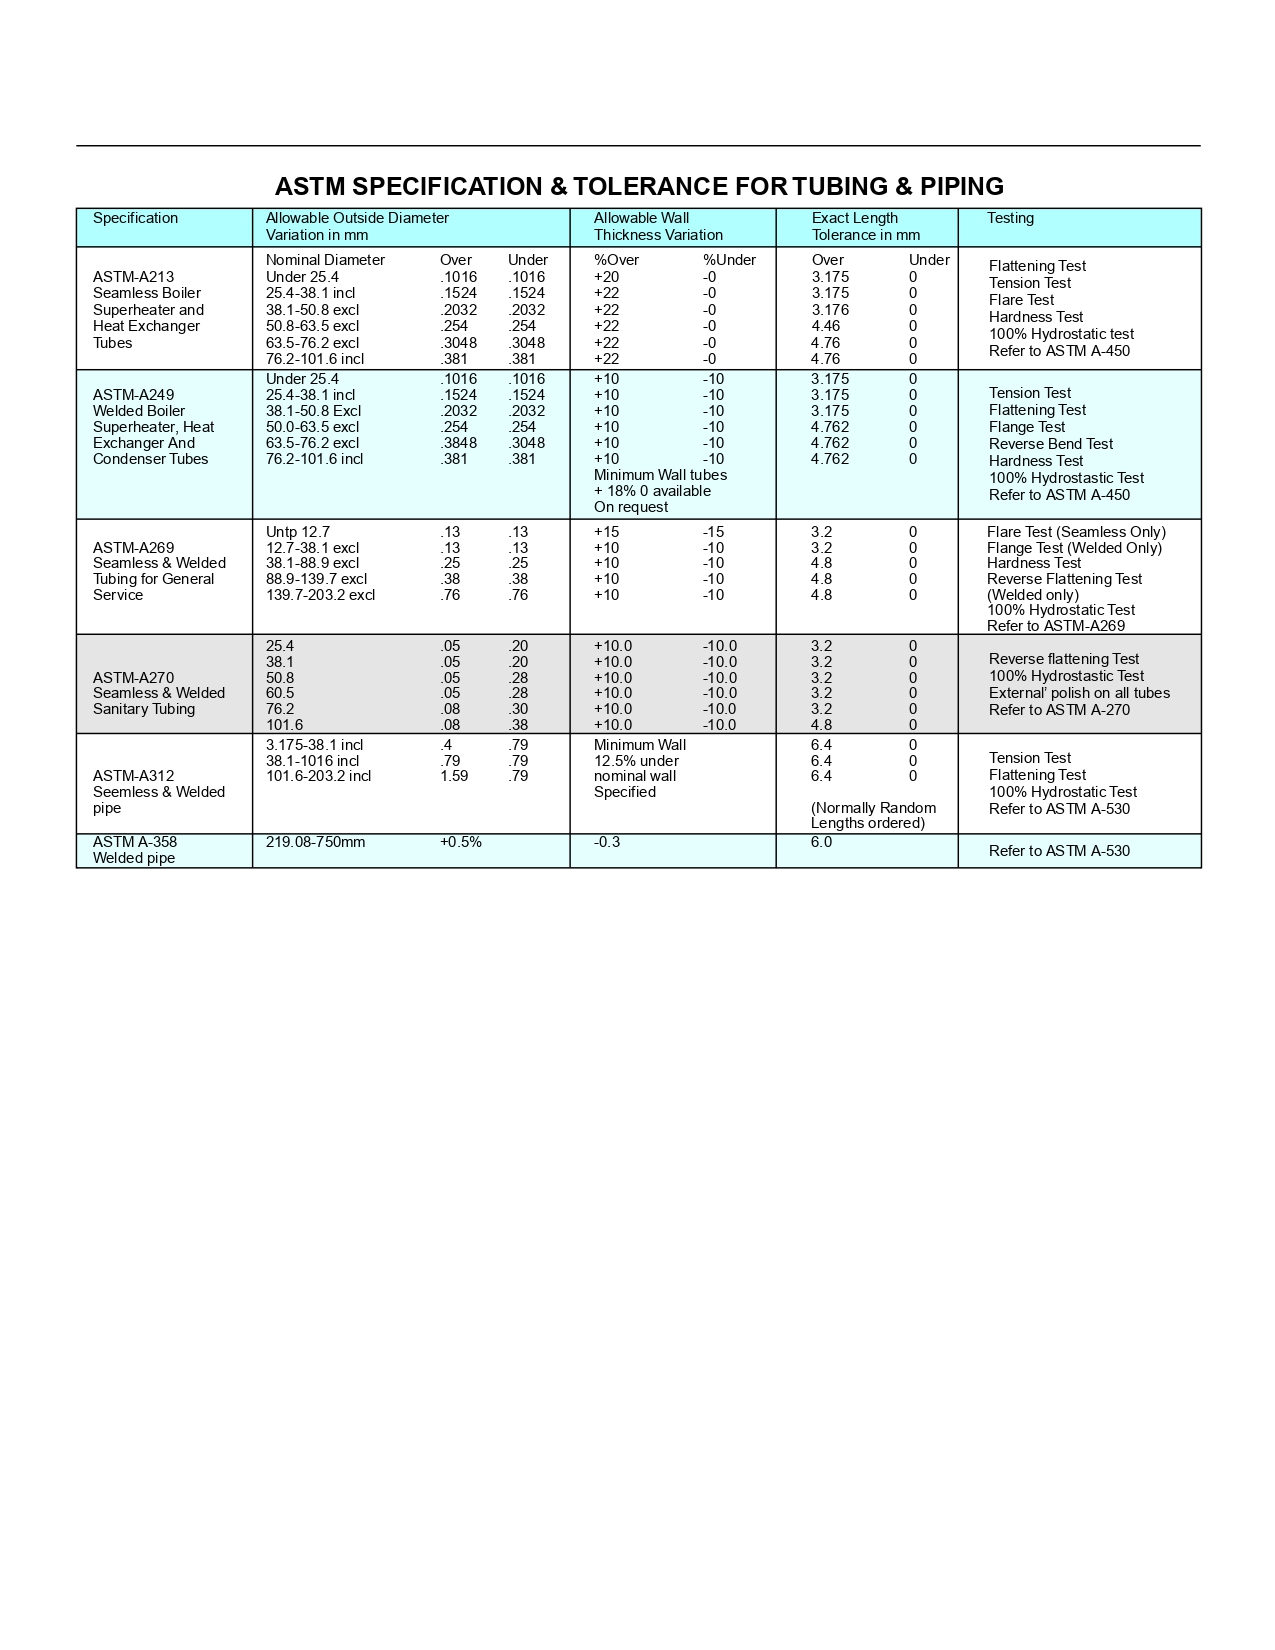 astm specifications of tubes and pipes with tolerace and pressure rating chart/table